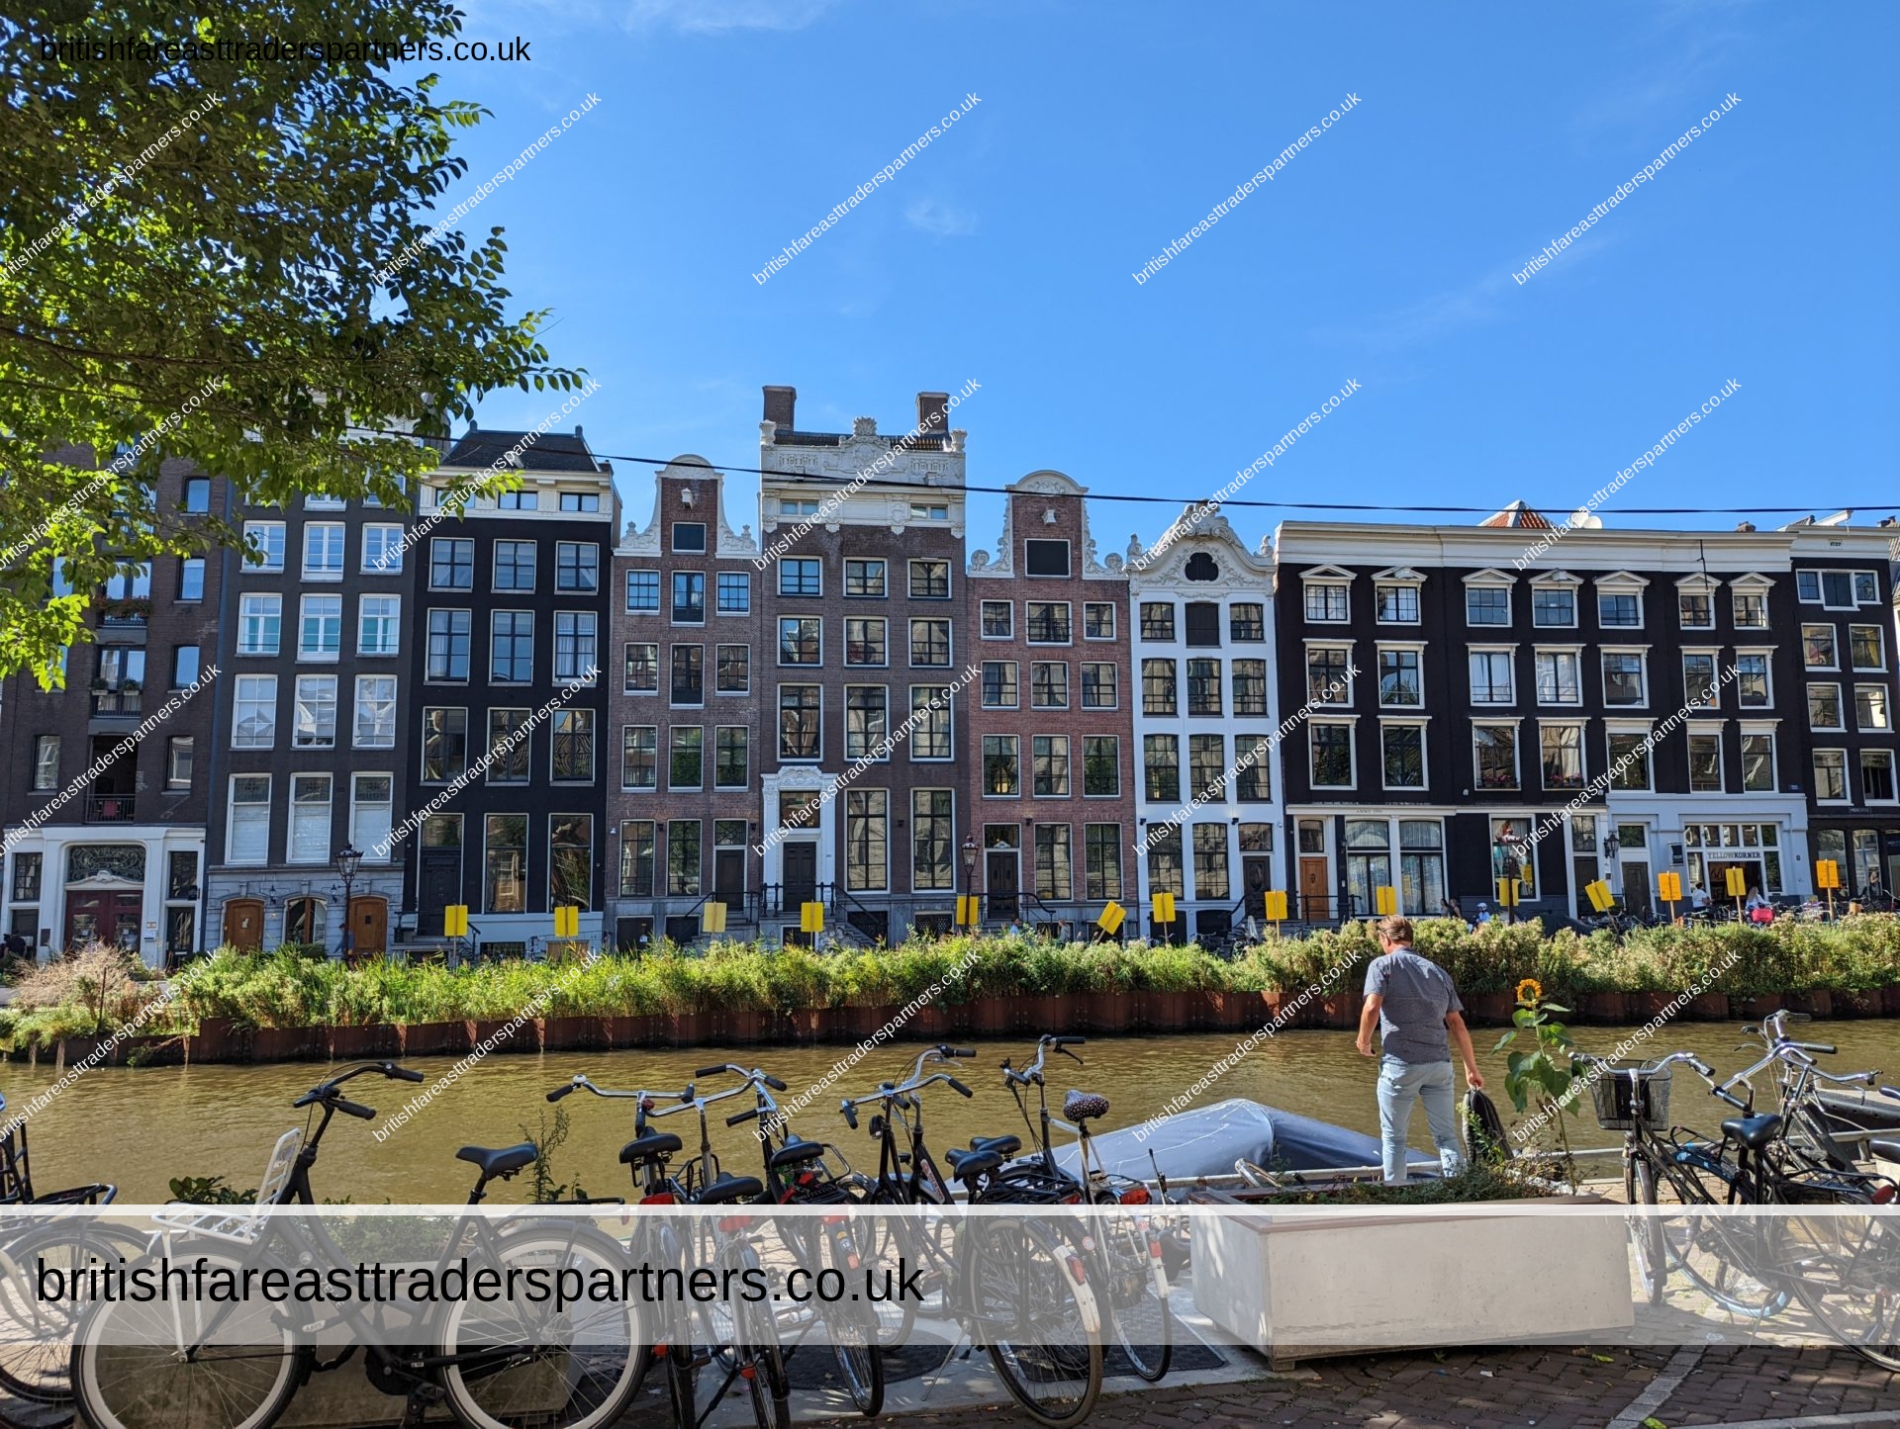 Join us on a LEISURELY STROLL as we explore the leafy JORDAAN DISTRICT and the BLOEMENMARKT (Flower Market) in the Capital City of AMSTERDAM, The NETHERLANDS.